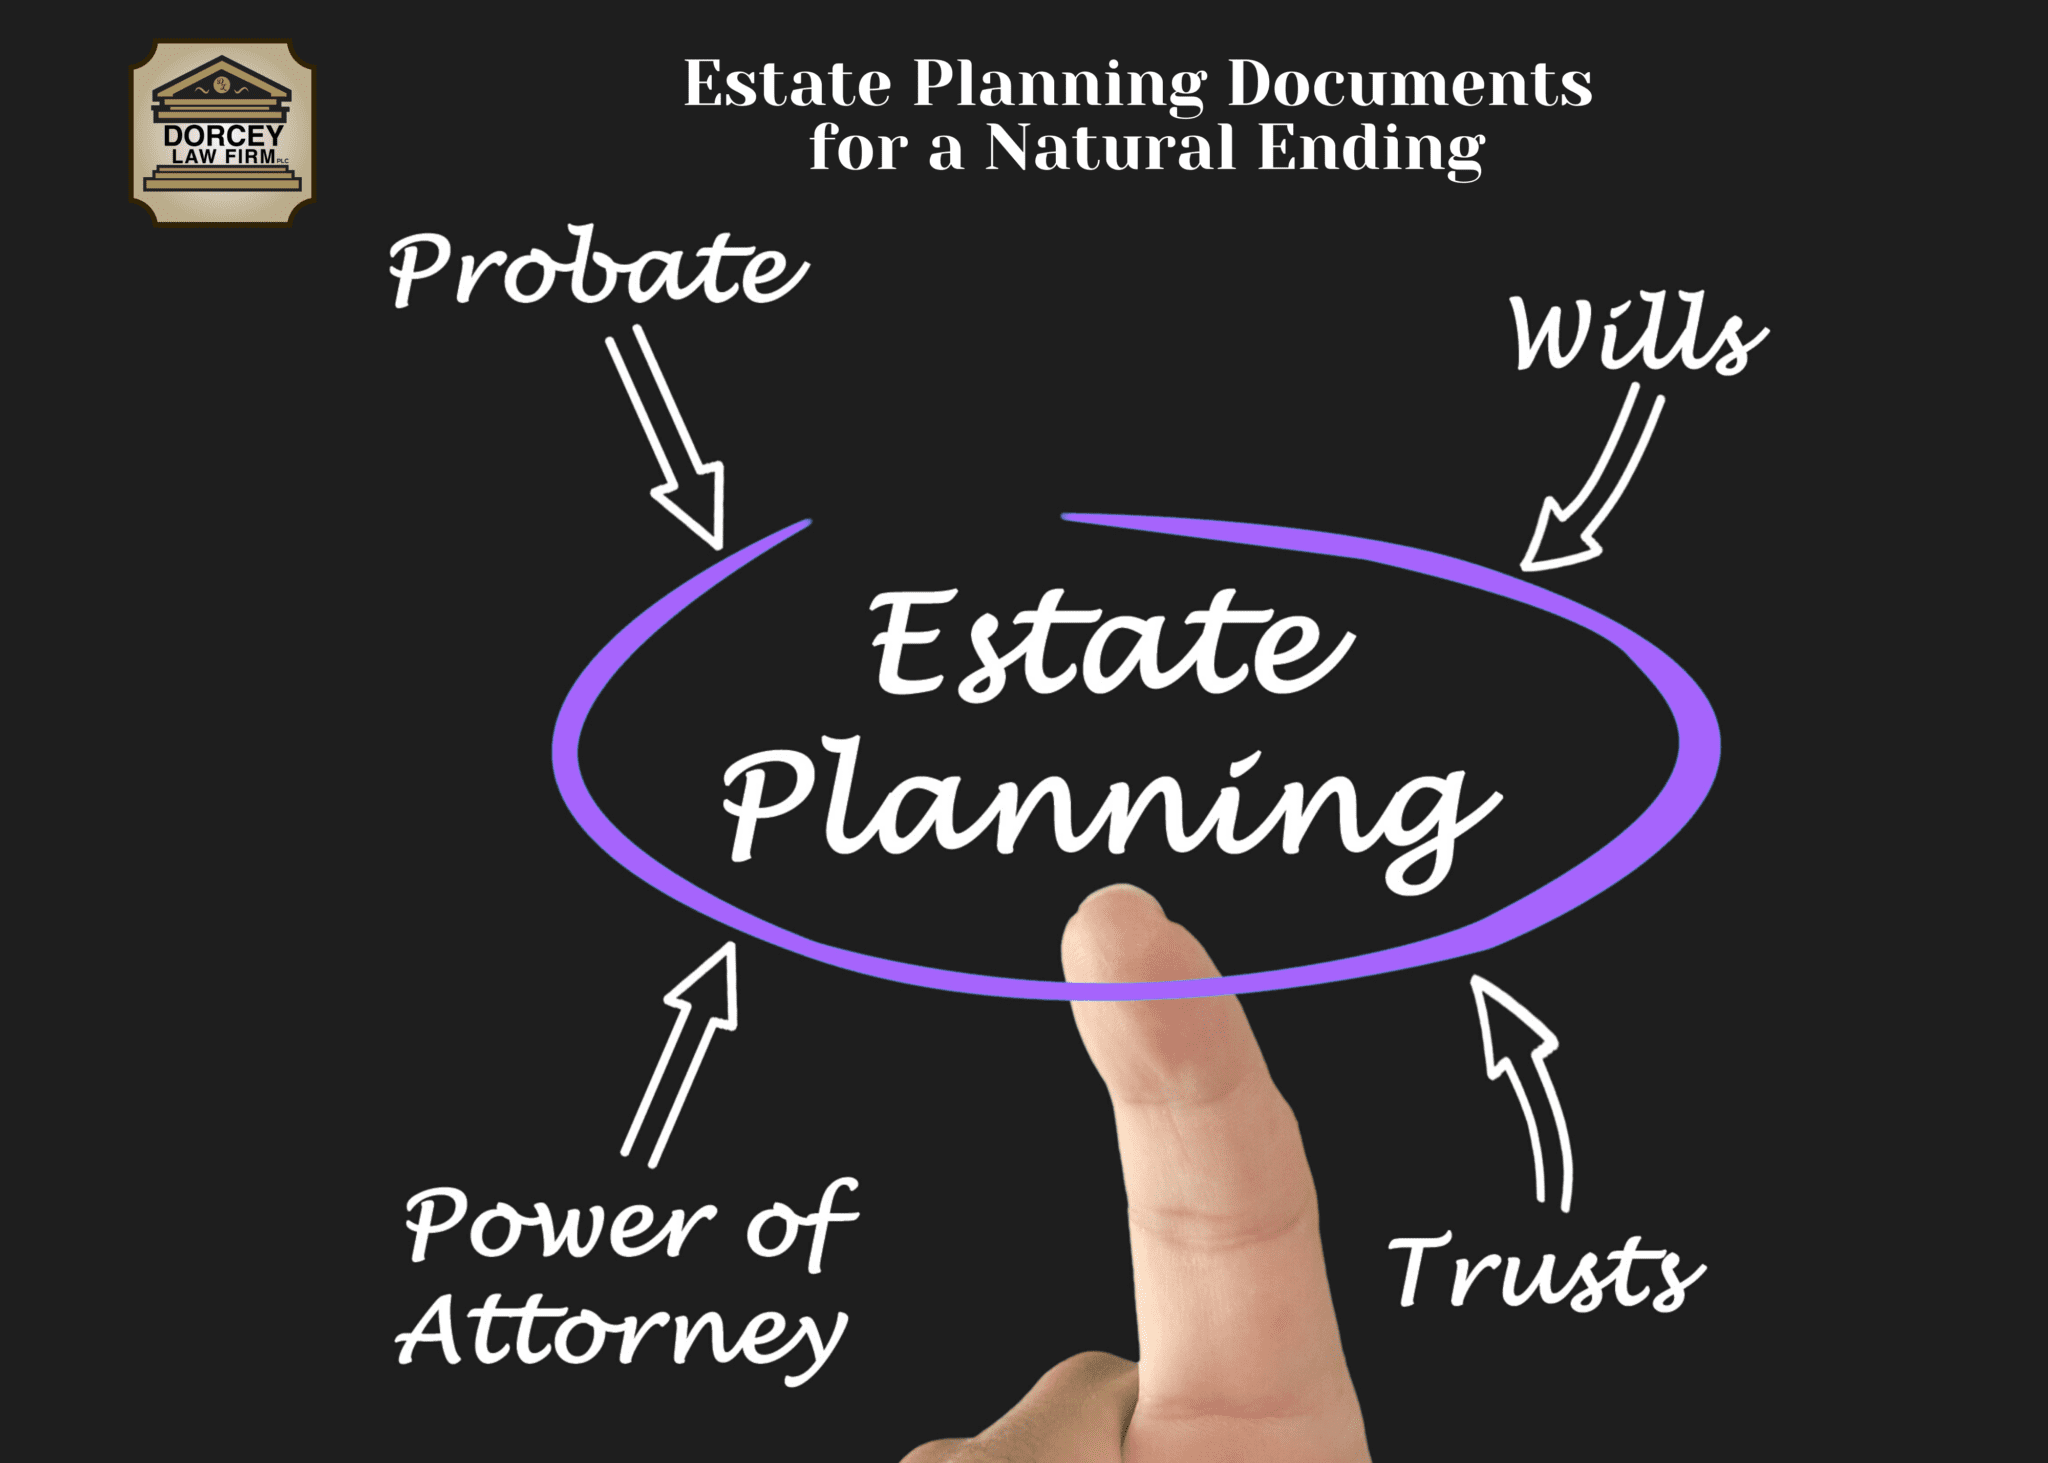 Estate Planning Documents for a Natural Ending